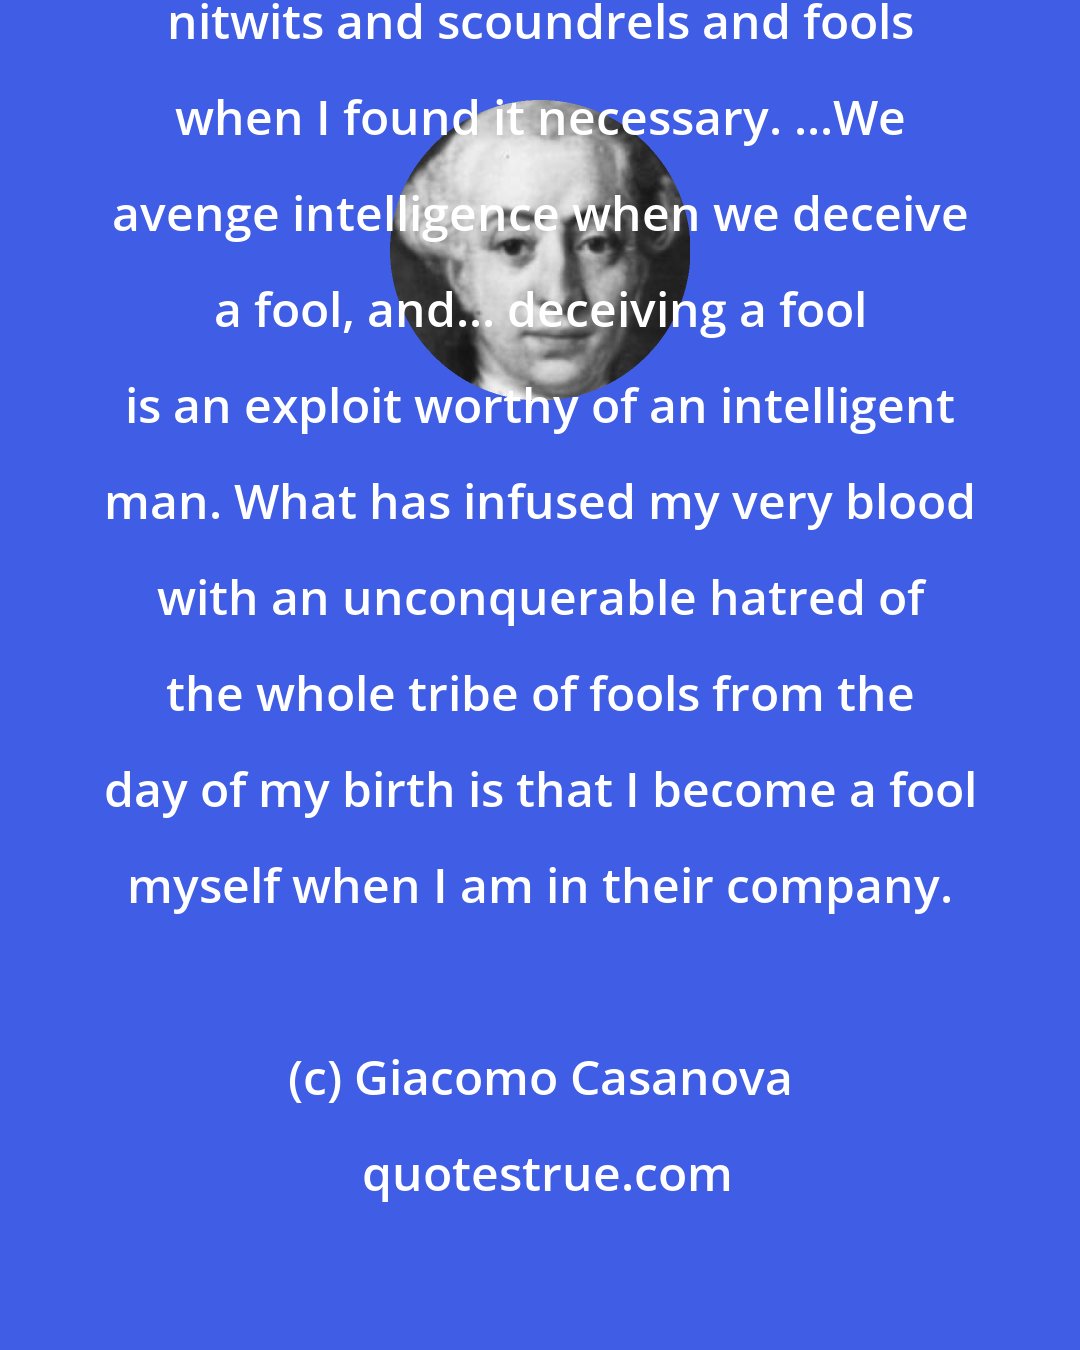 Giacomo Casanova: I often had no scruples about deceiving nitwits and scoundrels and fools when I found it necessary. ...We avenge intelligence when we deceive a fool, and... deceiving a fool is an exploit worthy of an intelligent man. What has infused my very blood with an unconquerable hatred of the whole tribe of fools from the day of my birth is that I become a fool myself when I am in their company.